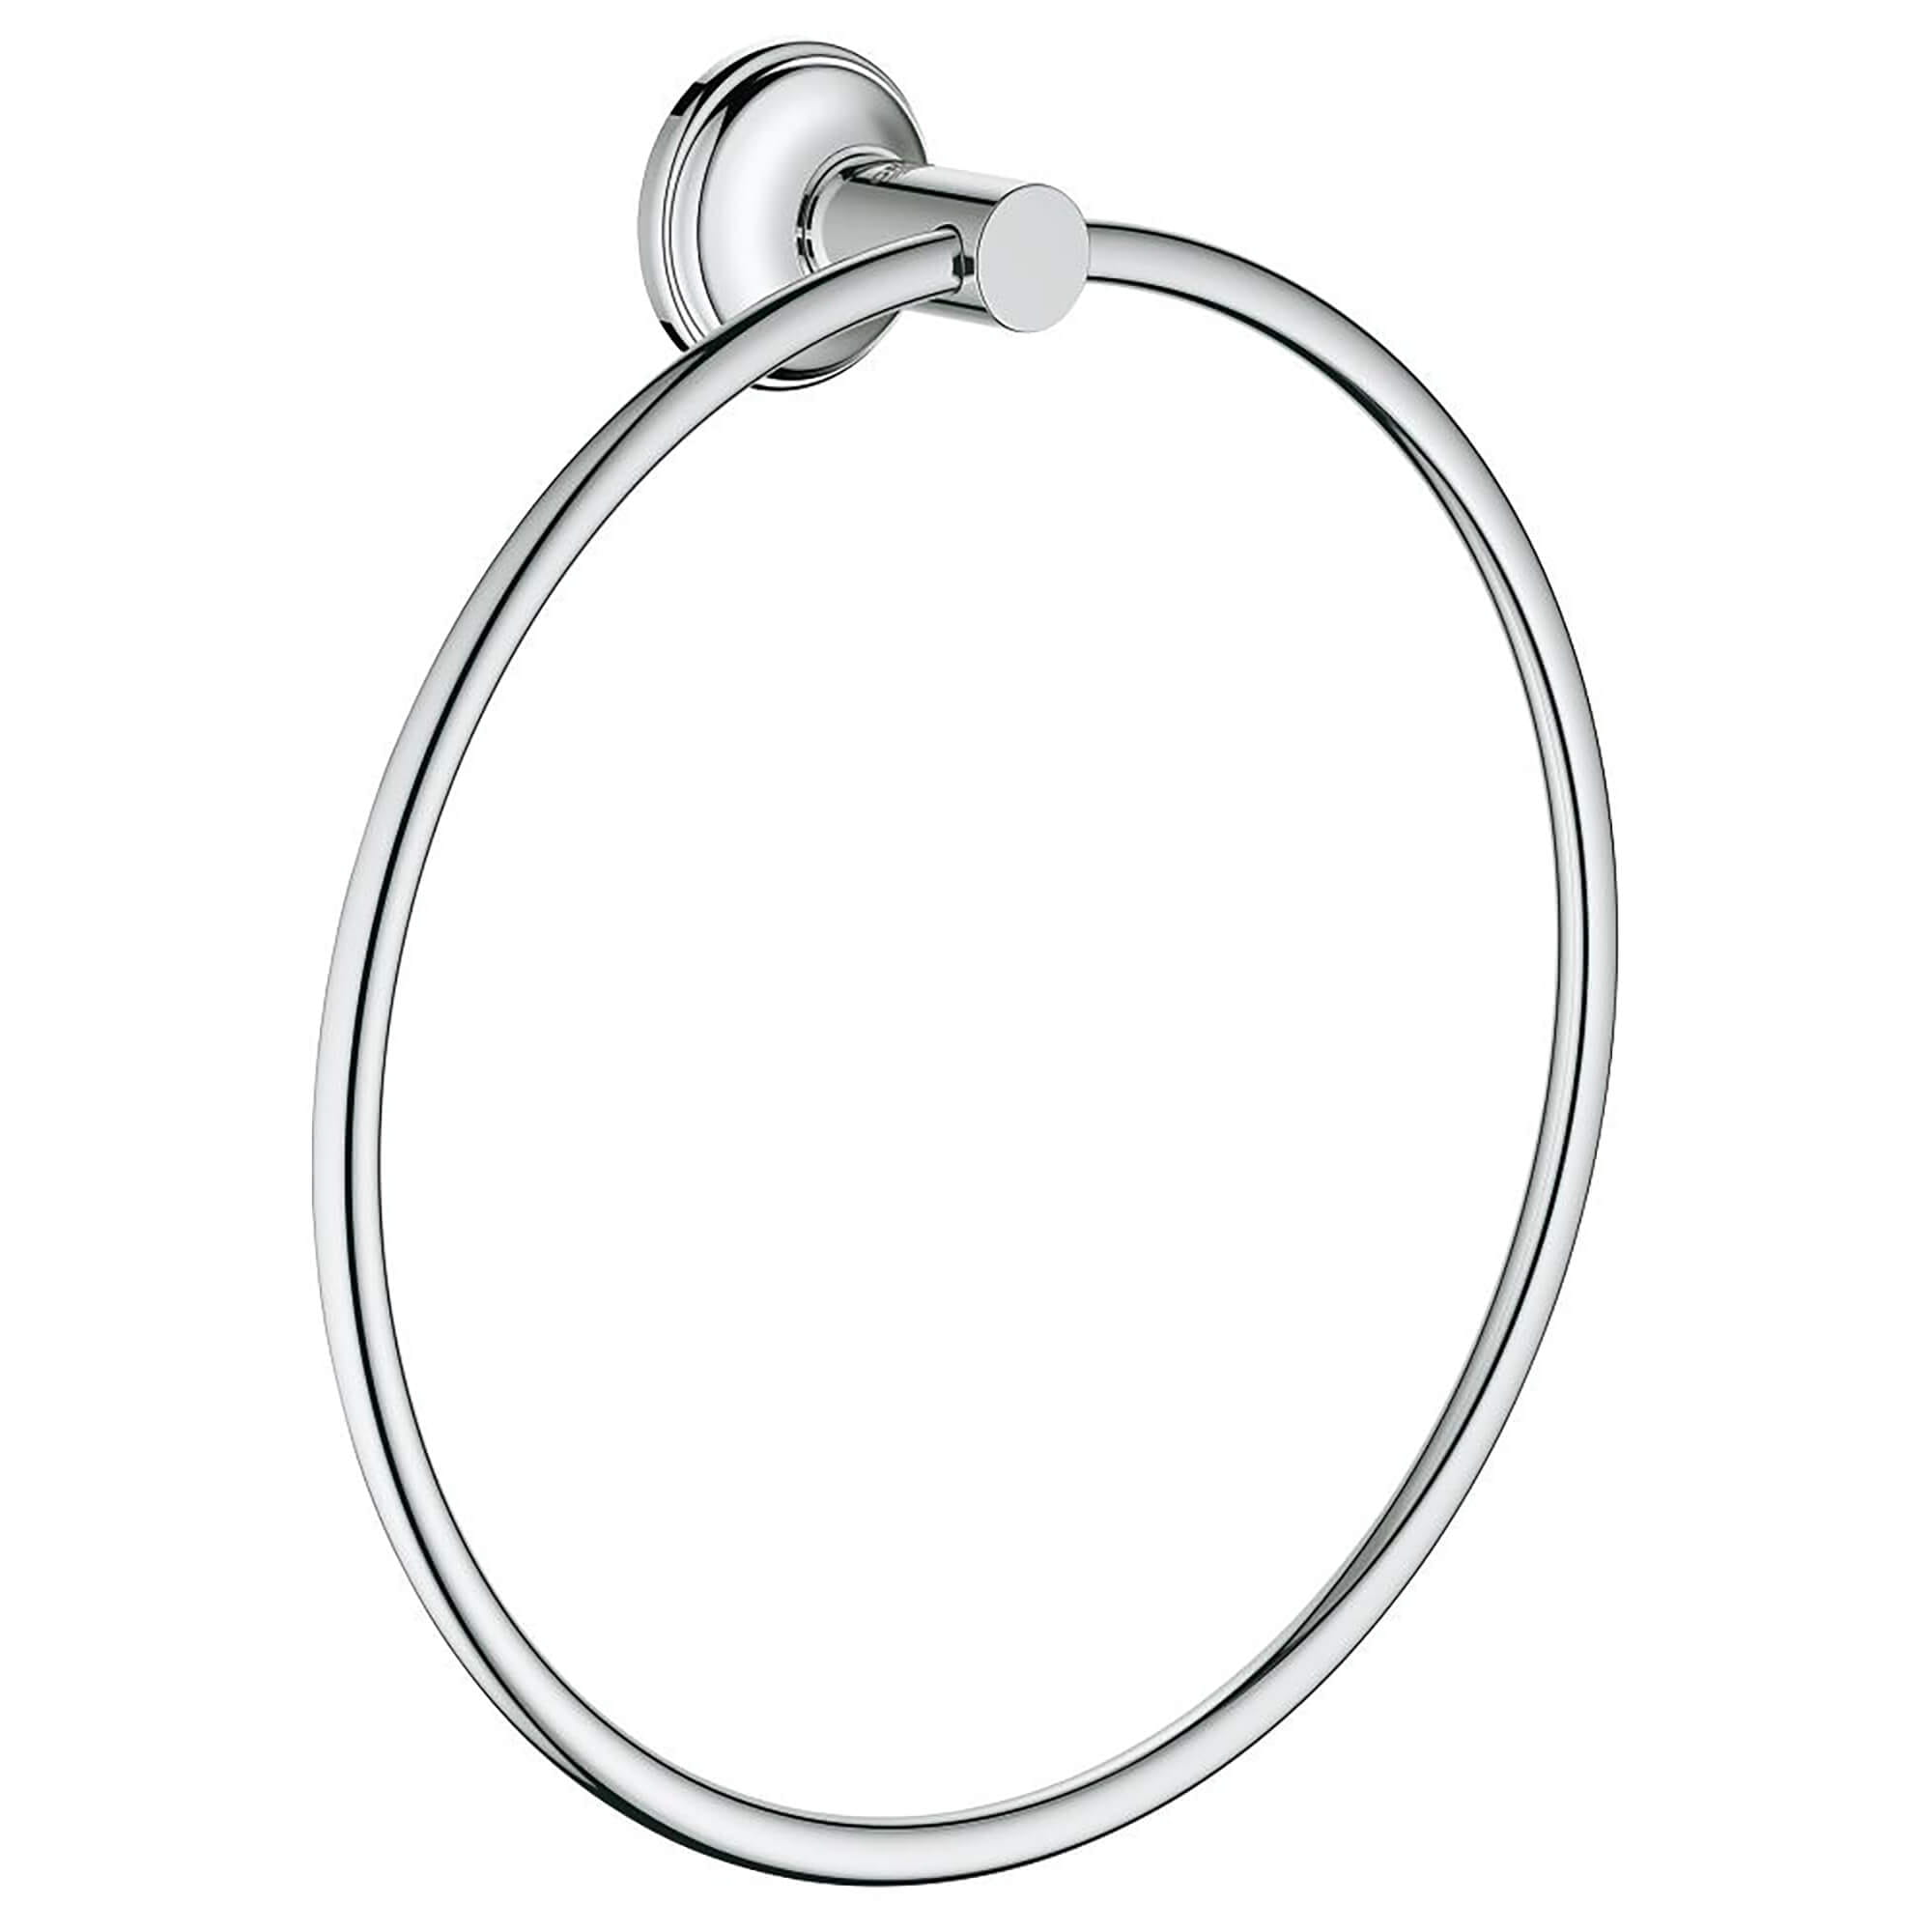 GROHE Grohe Essentials Towel Ring Wall Mounted Chrome Bathroom Accessory 40365001 4005176326240 